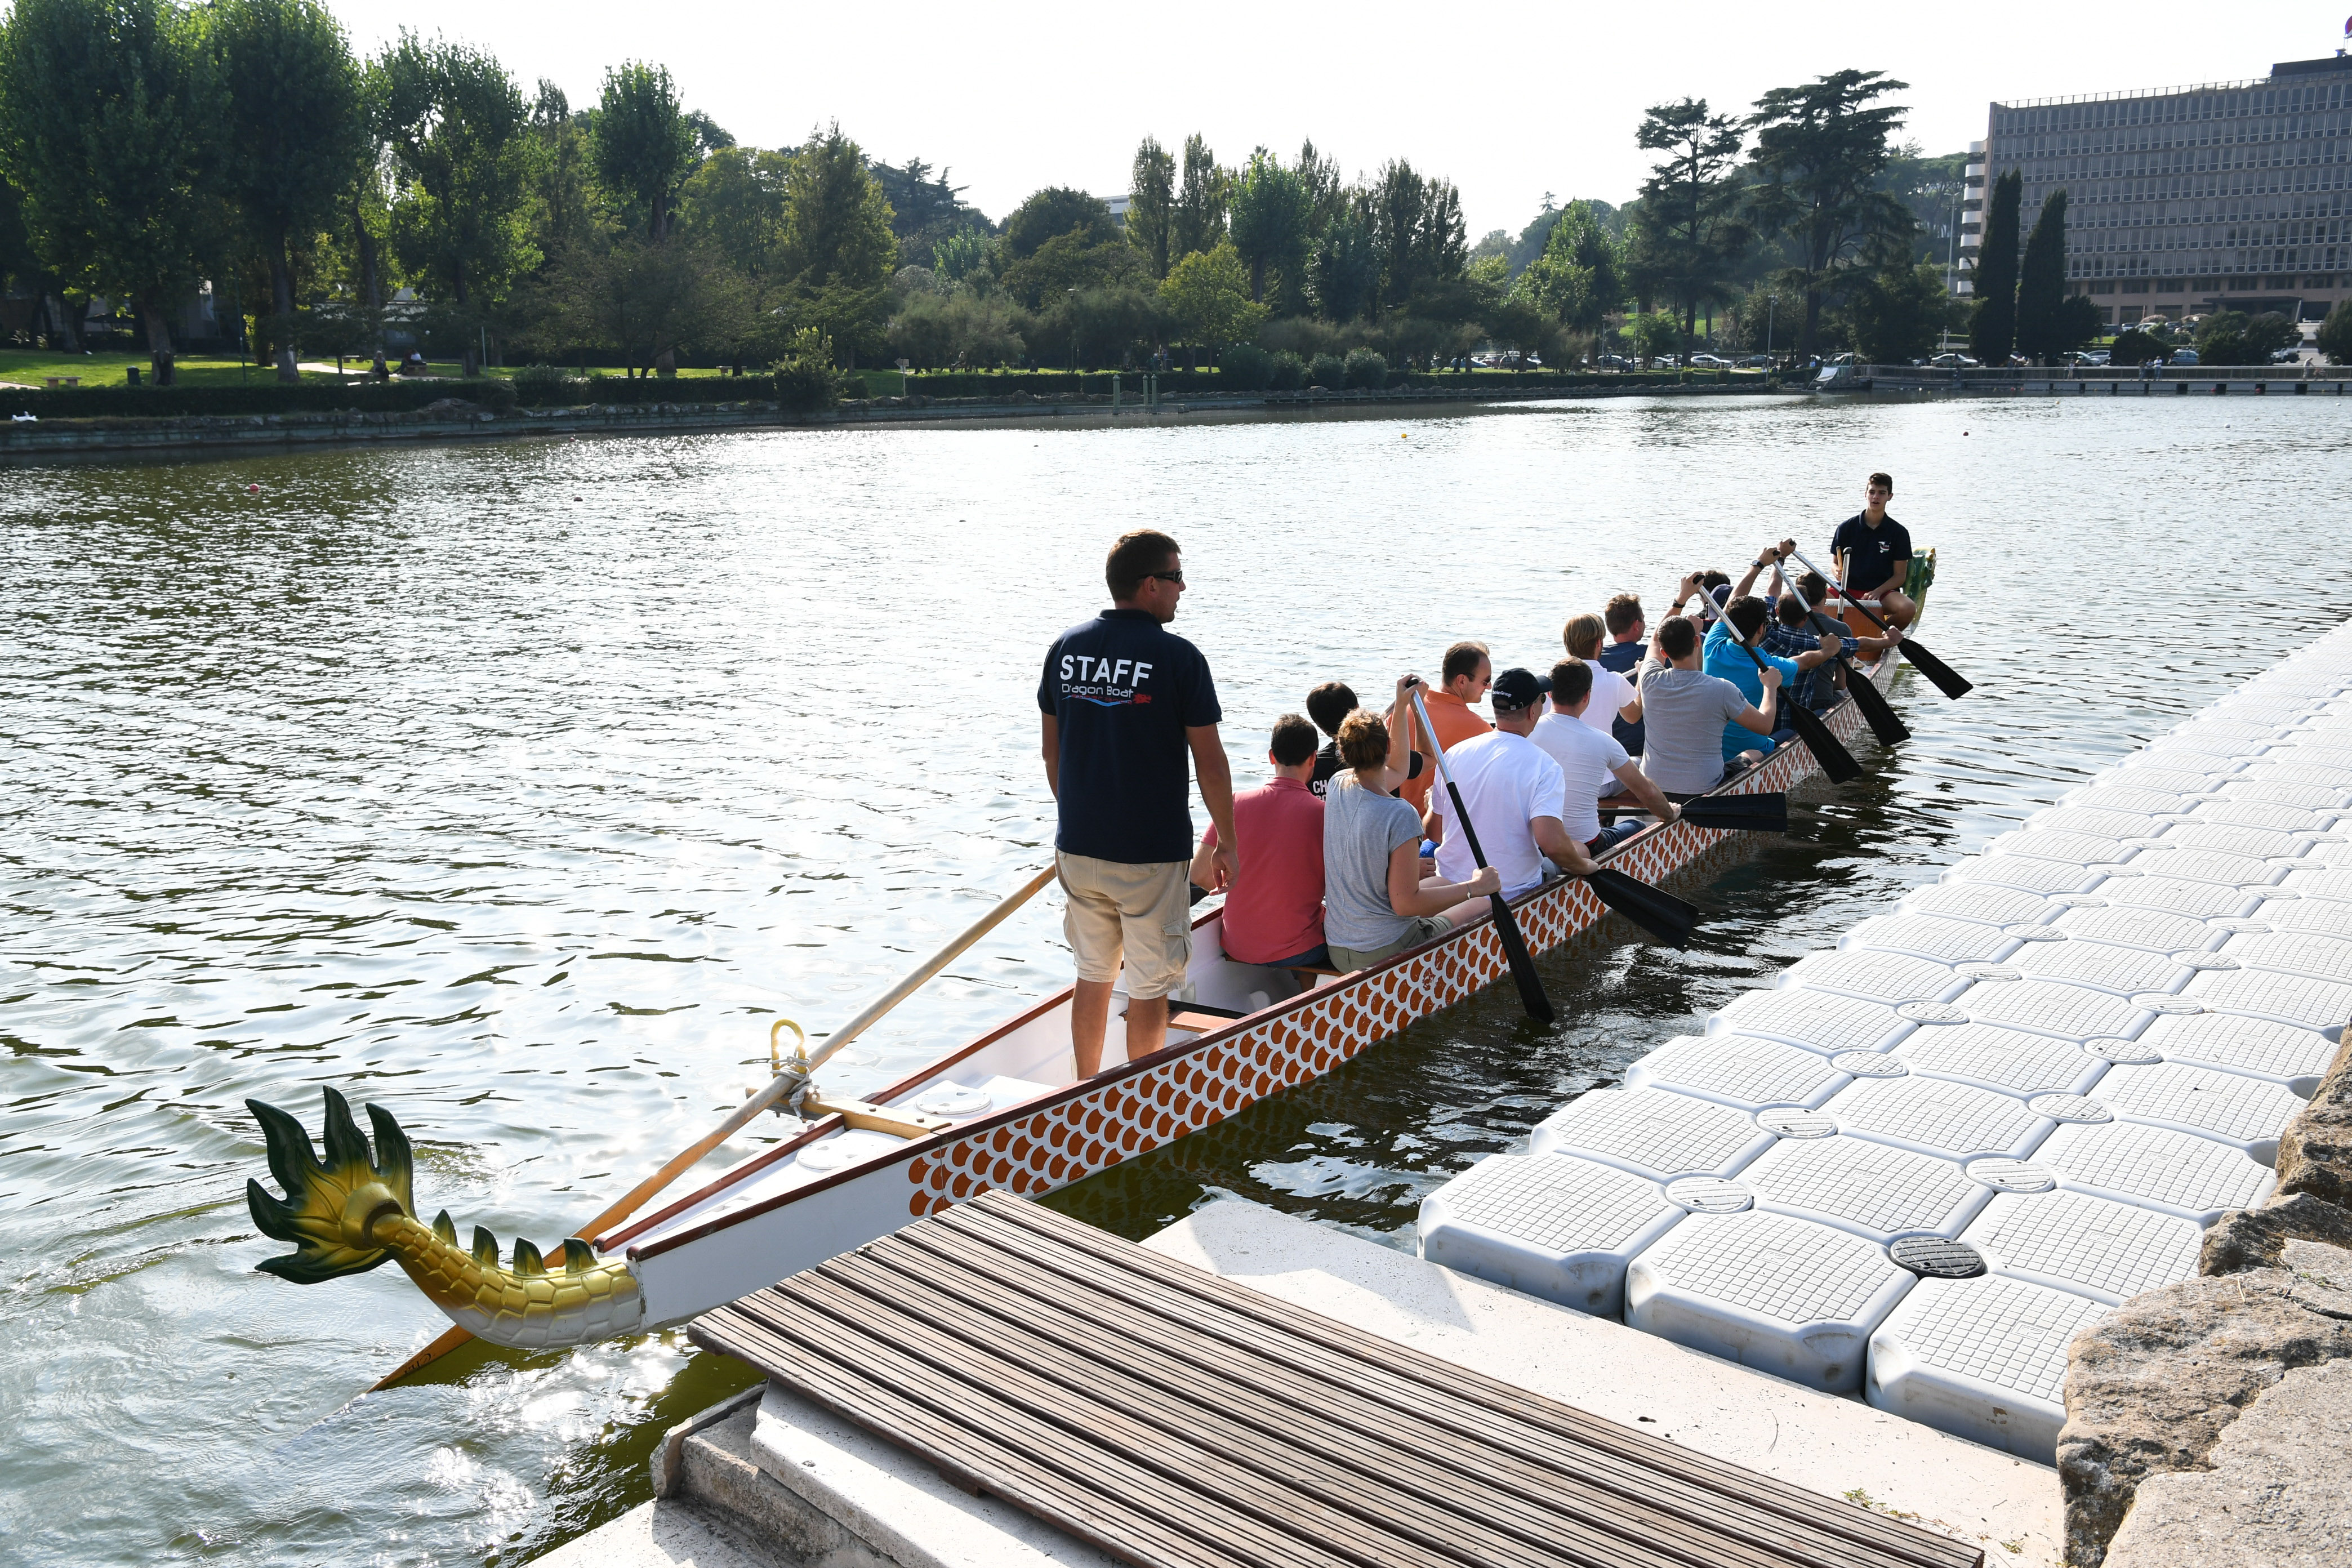 Incentive-roma-events-in-out-team-building-dragon-boat